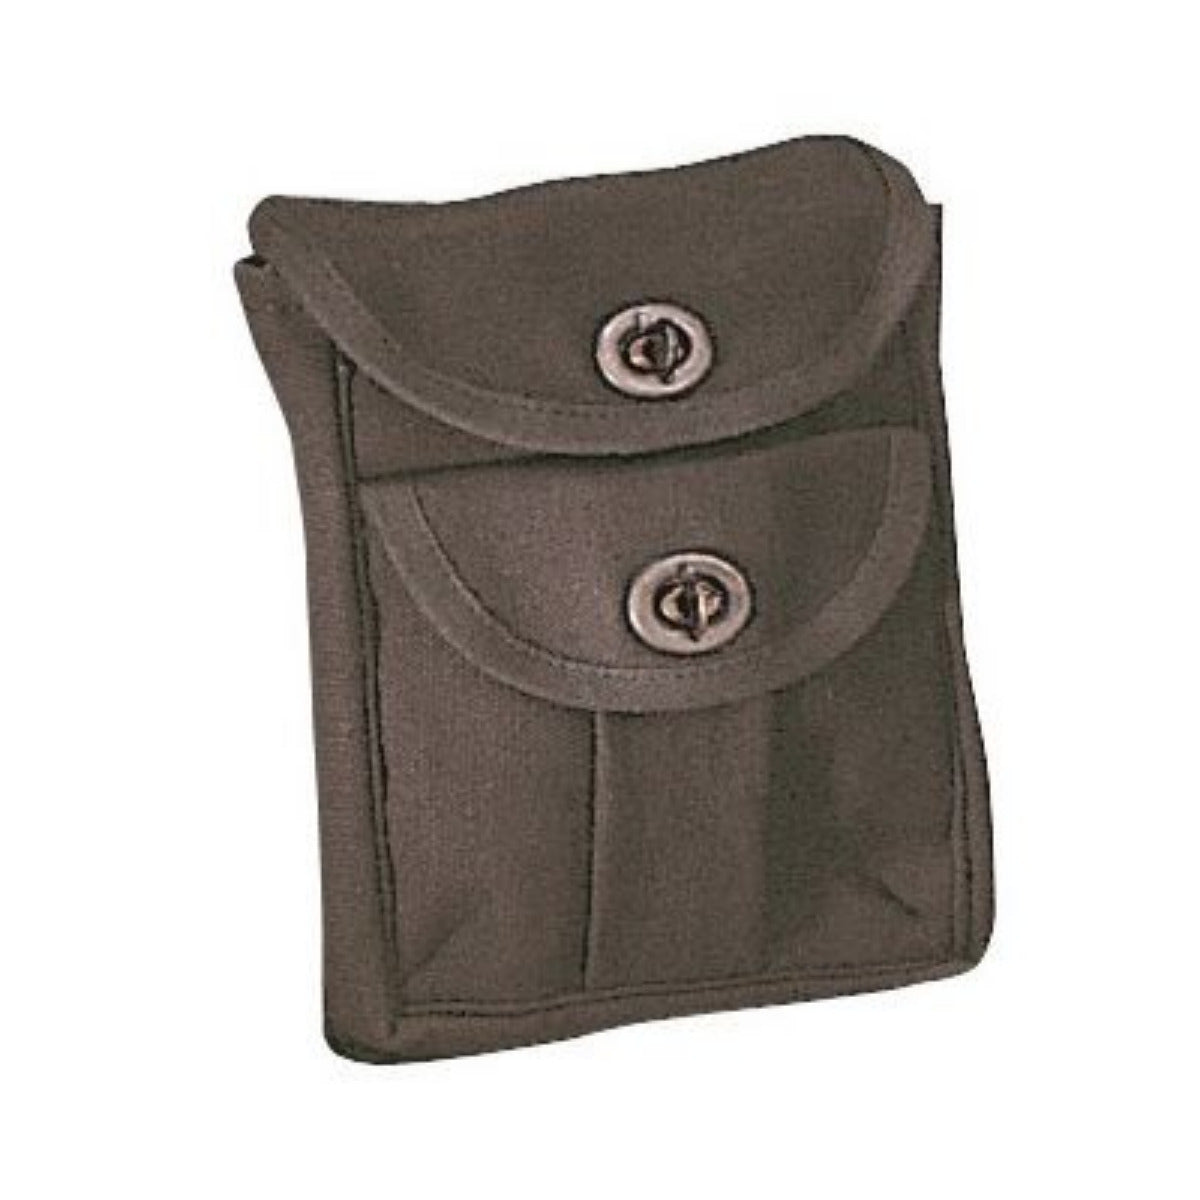 2-Pocket Ammo Pouch